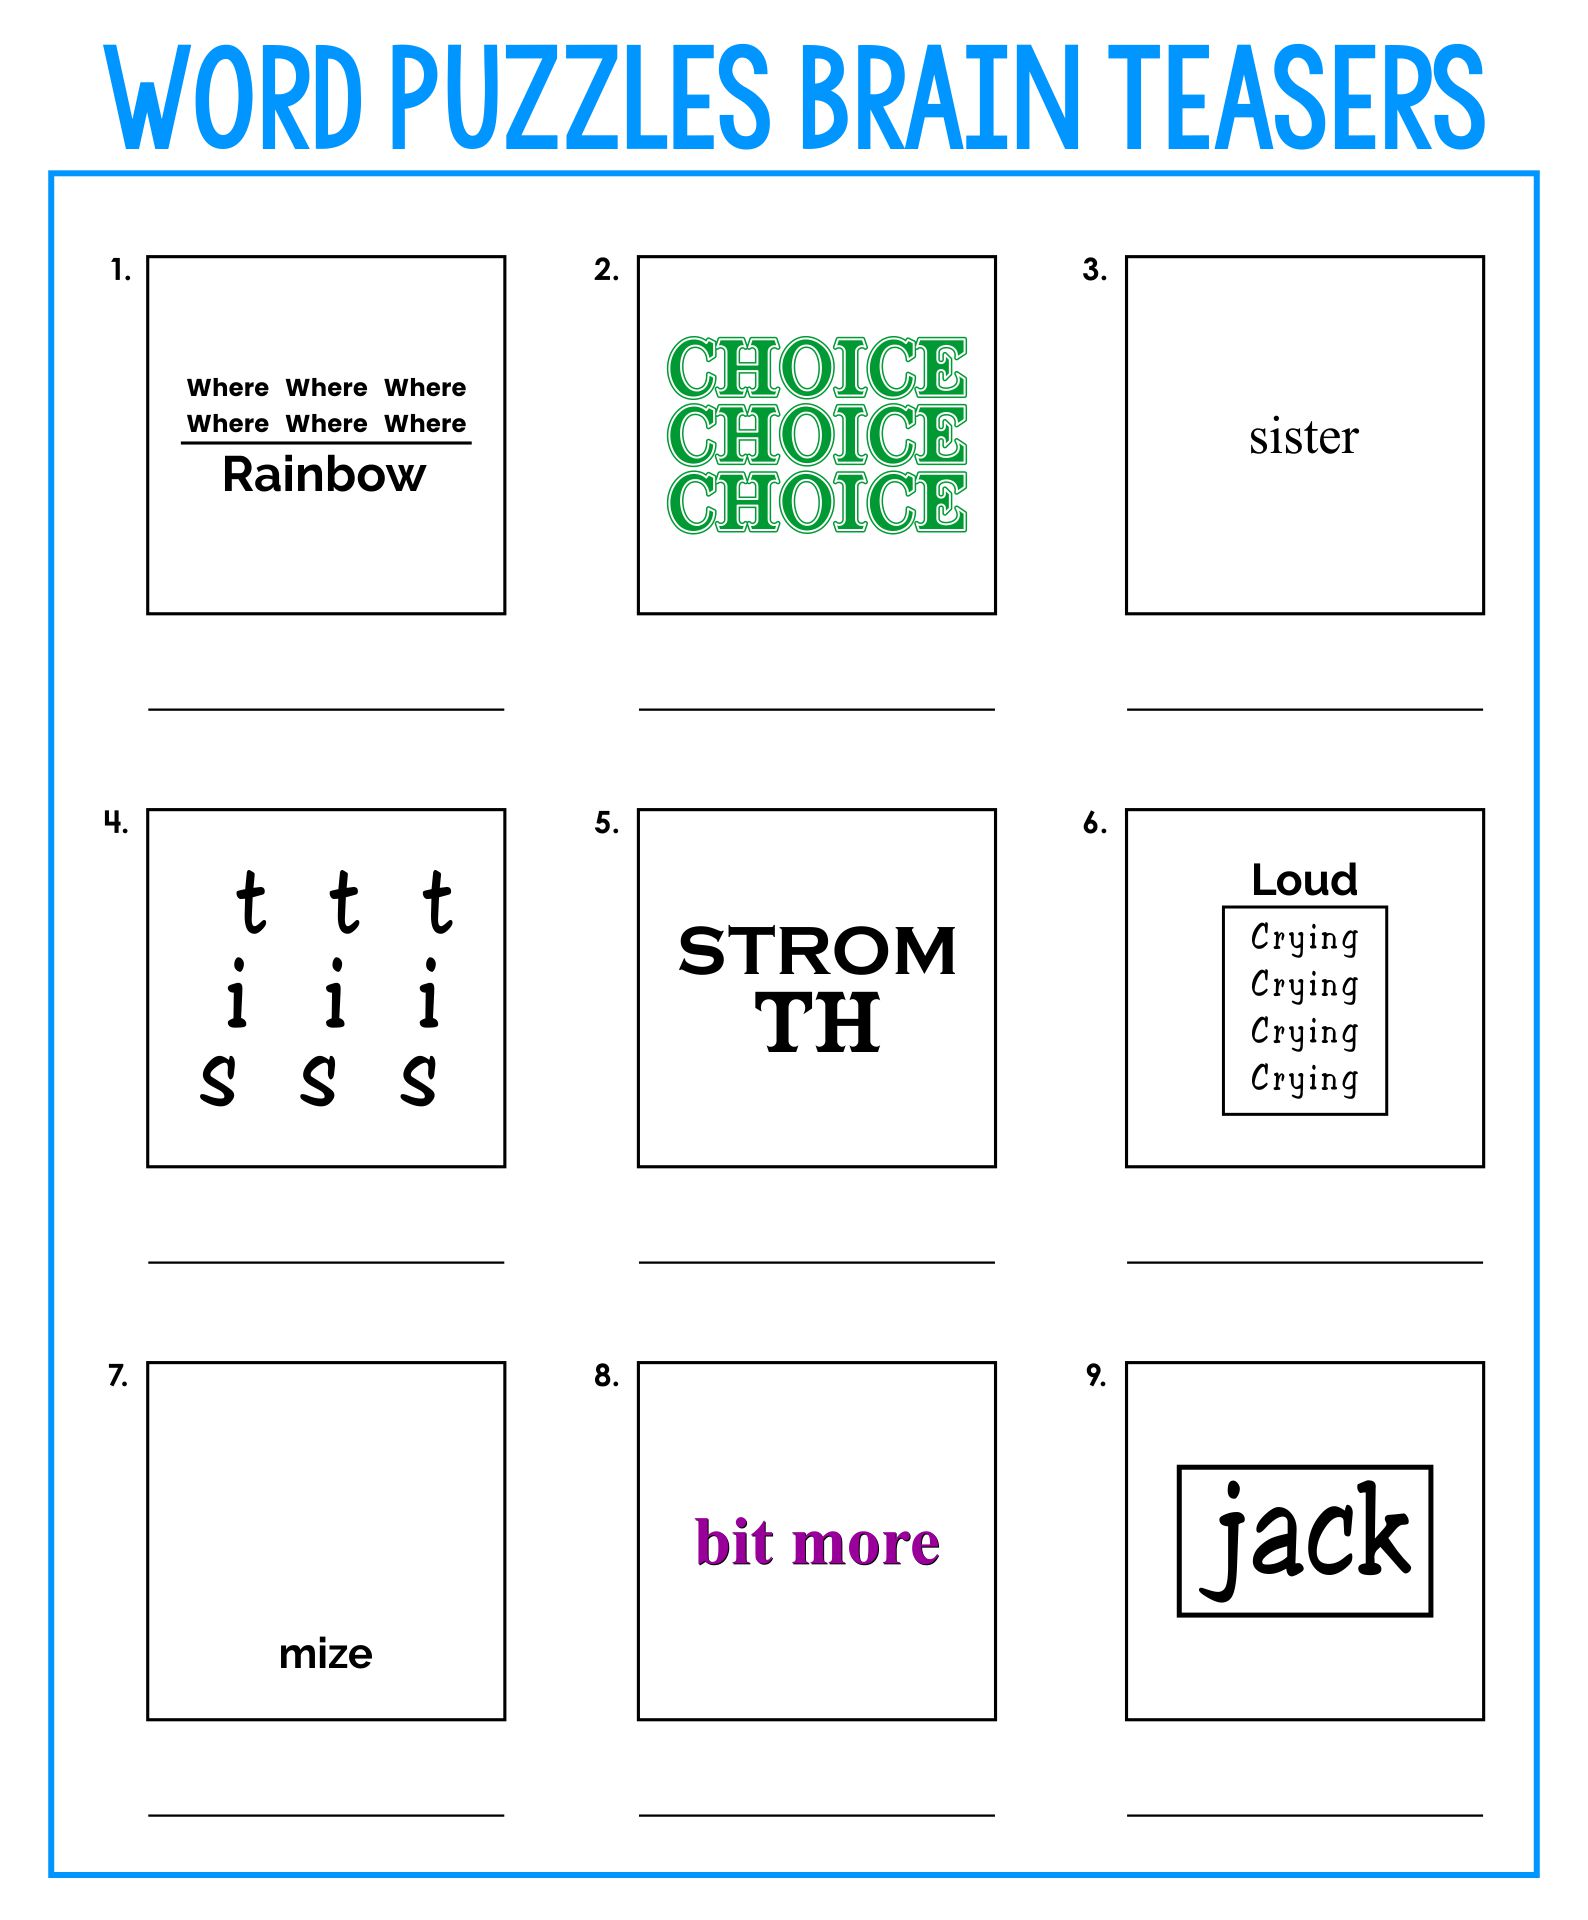 Printable Word Puzzles Brain Teasers